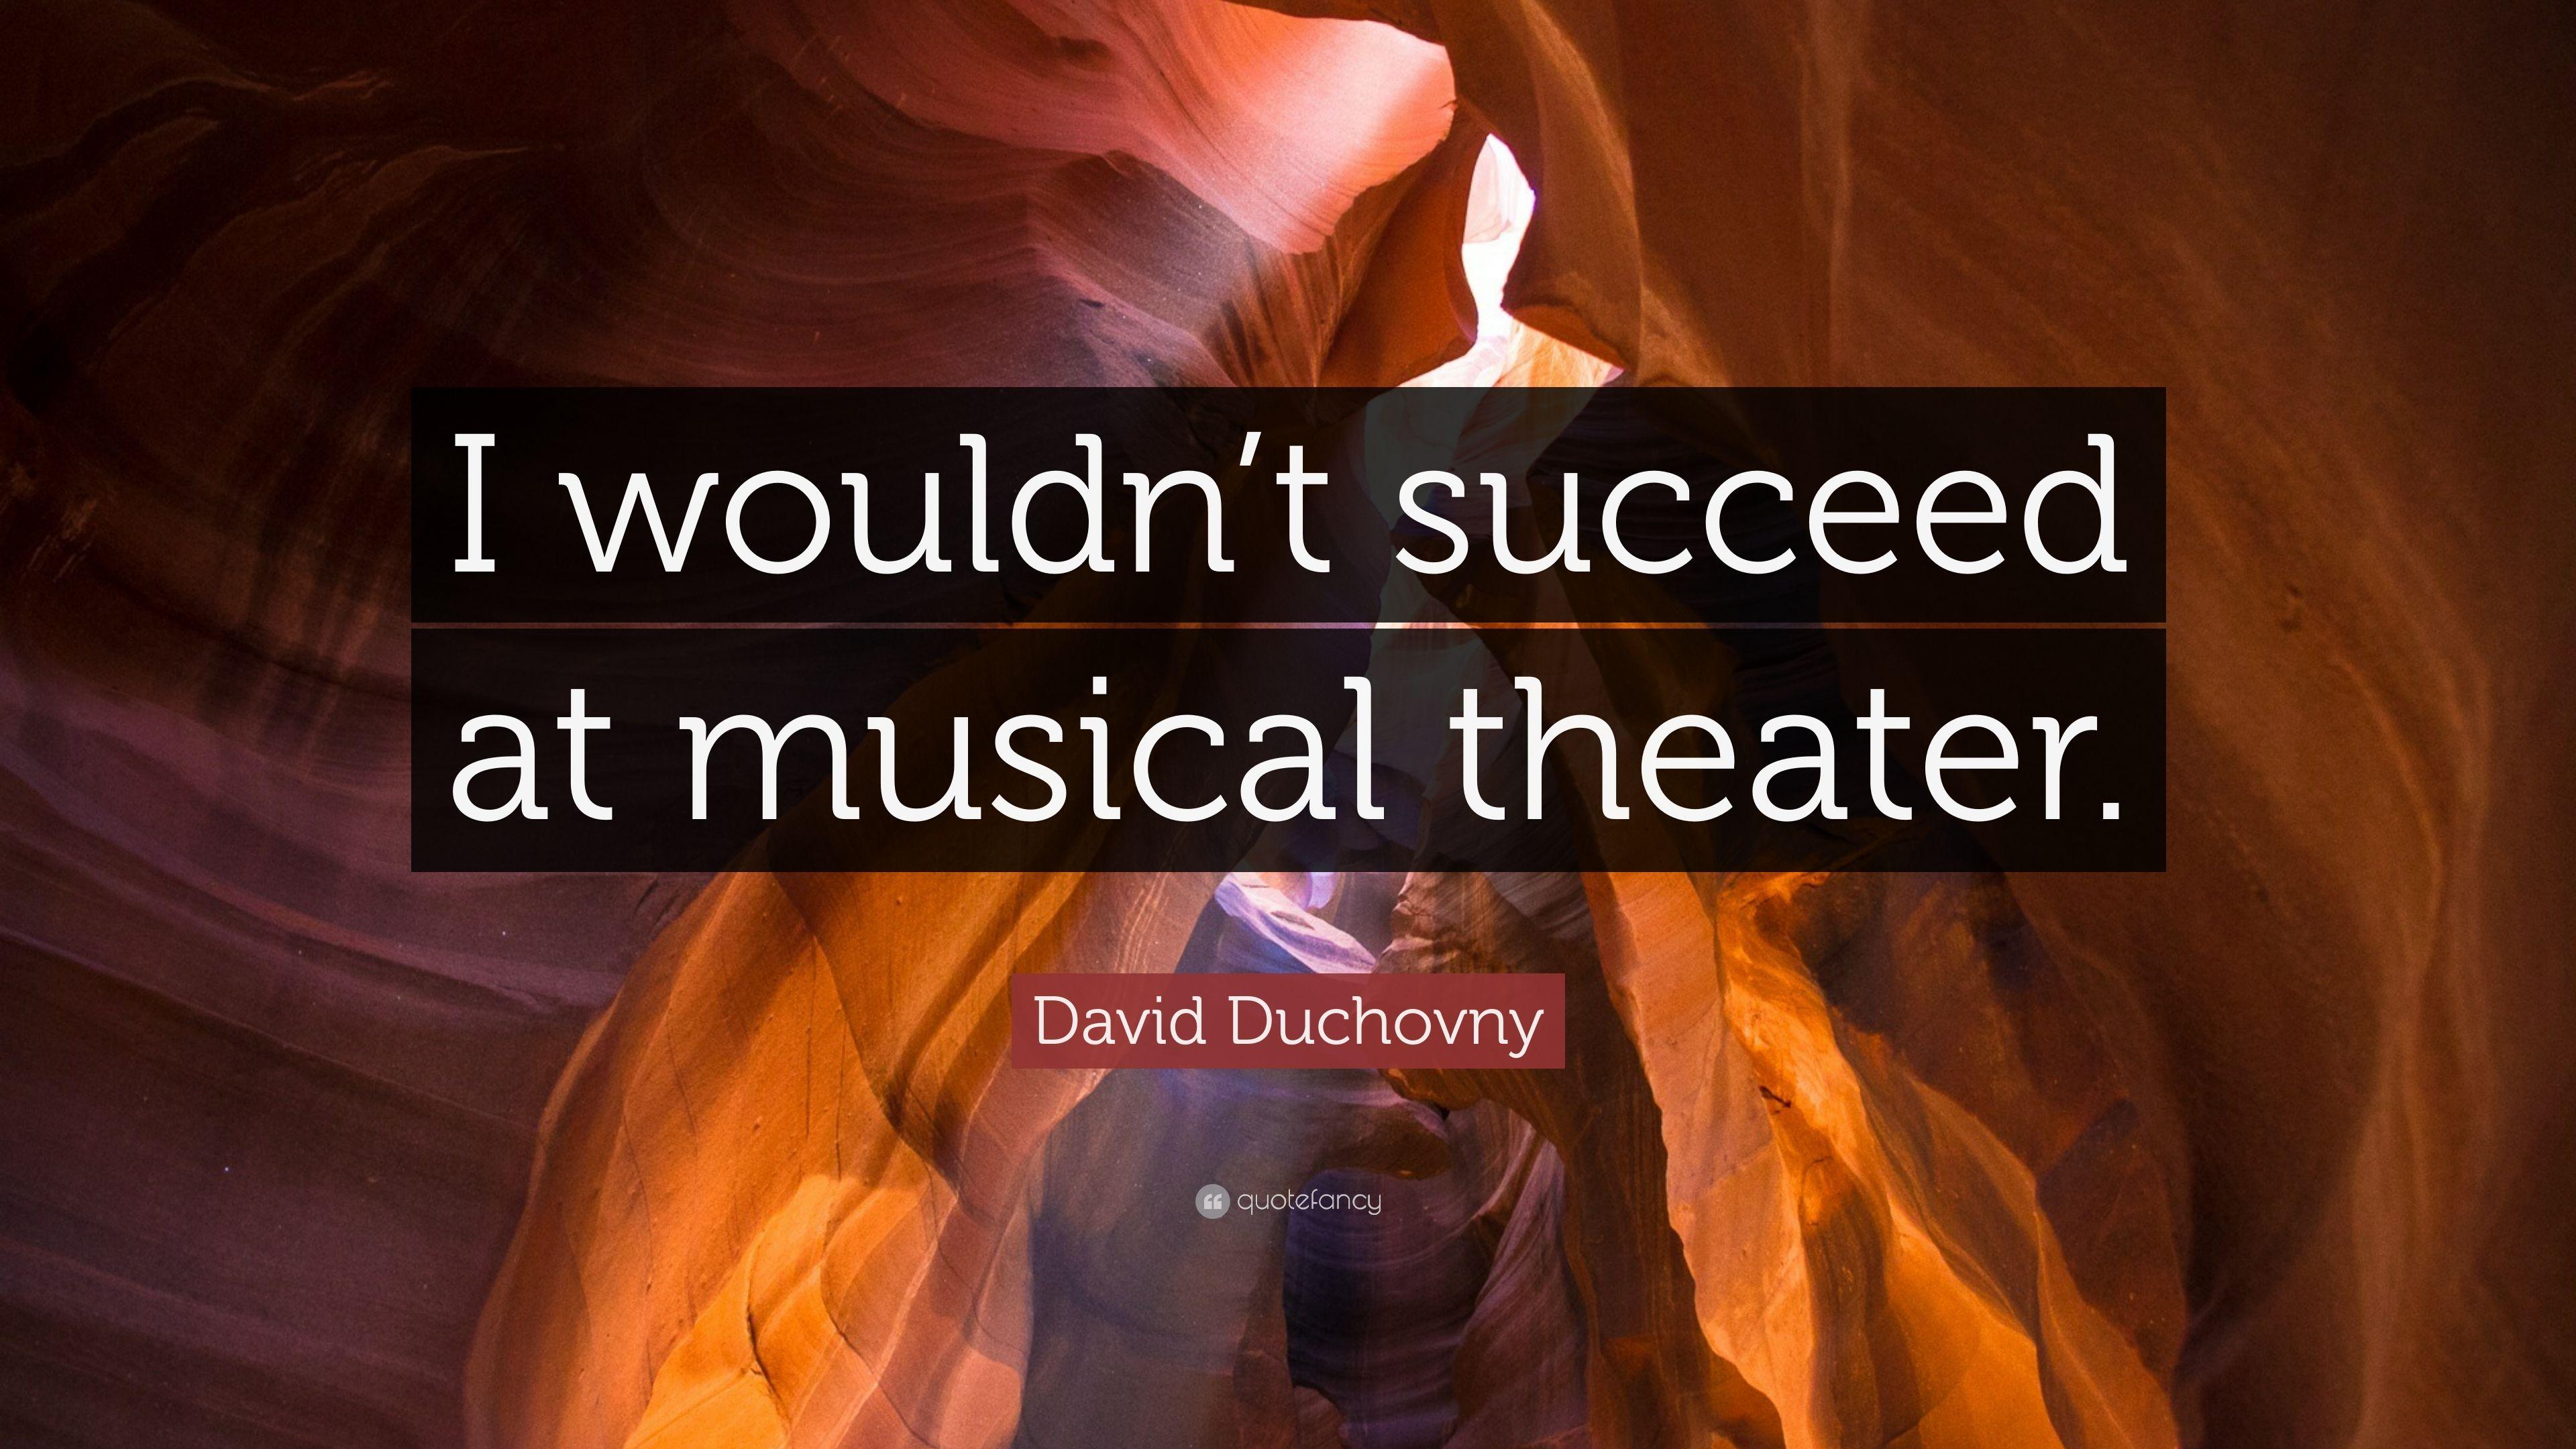 David Duchovny Quote: “I wouldn't succeed at musical theater.” 7